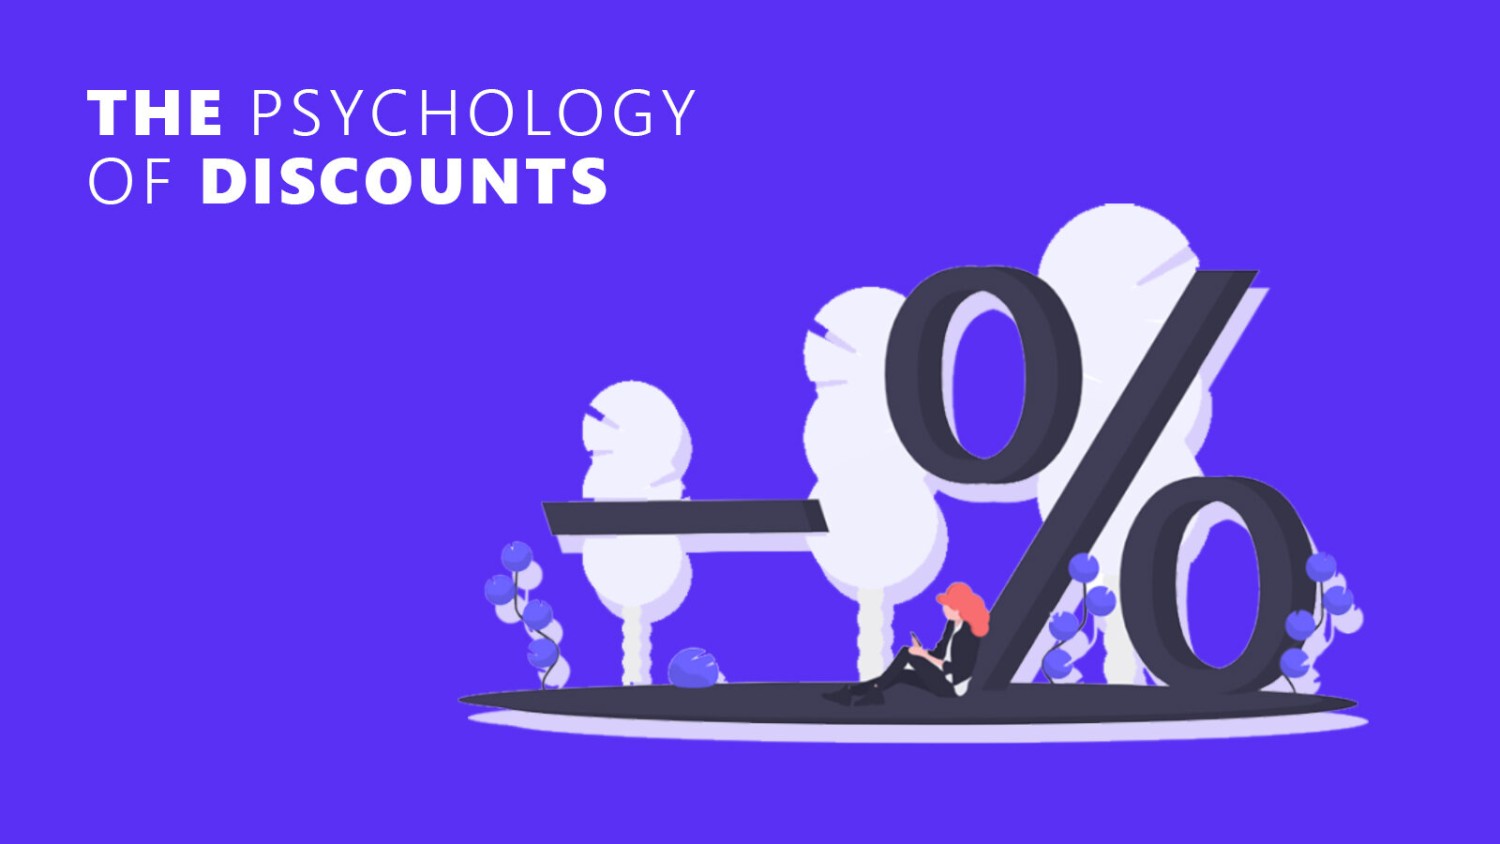 The psychology behind discounts and how it can benefit your business